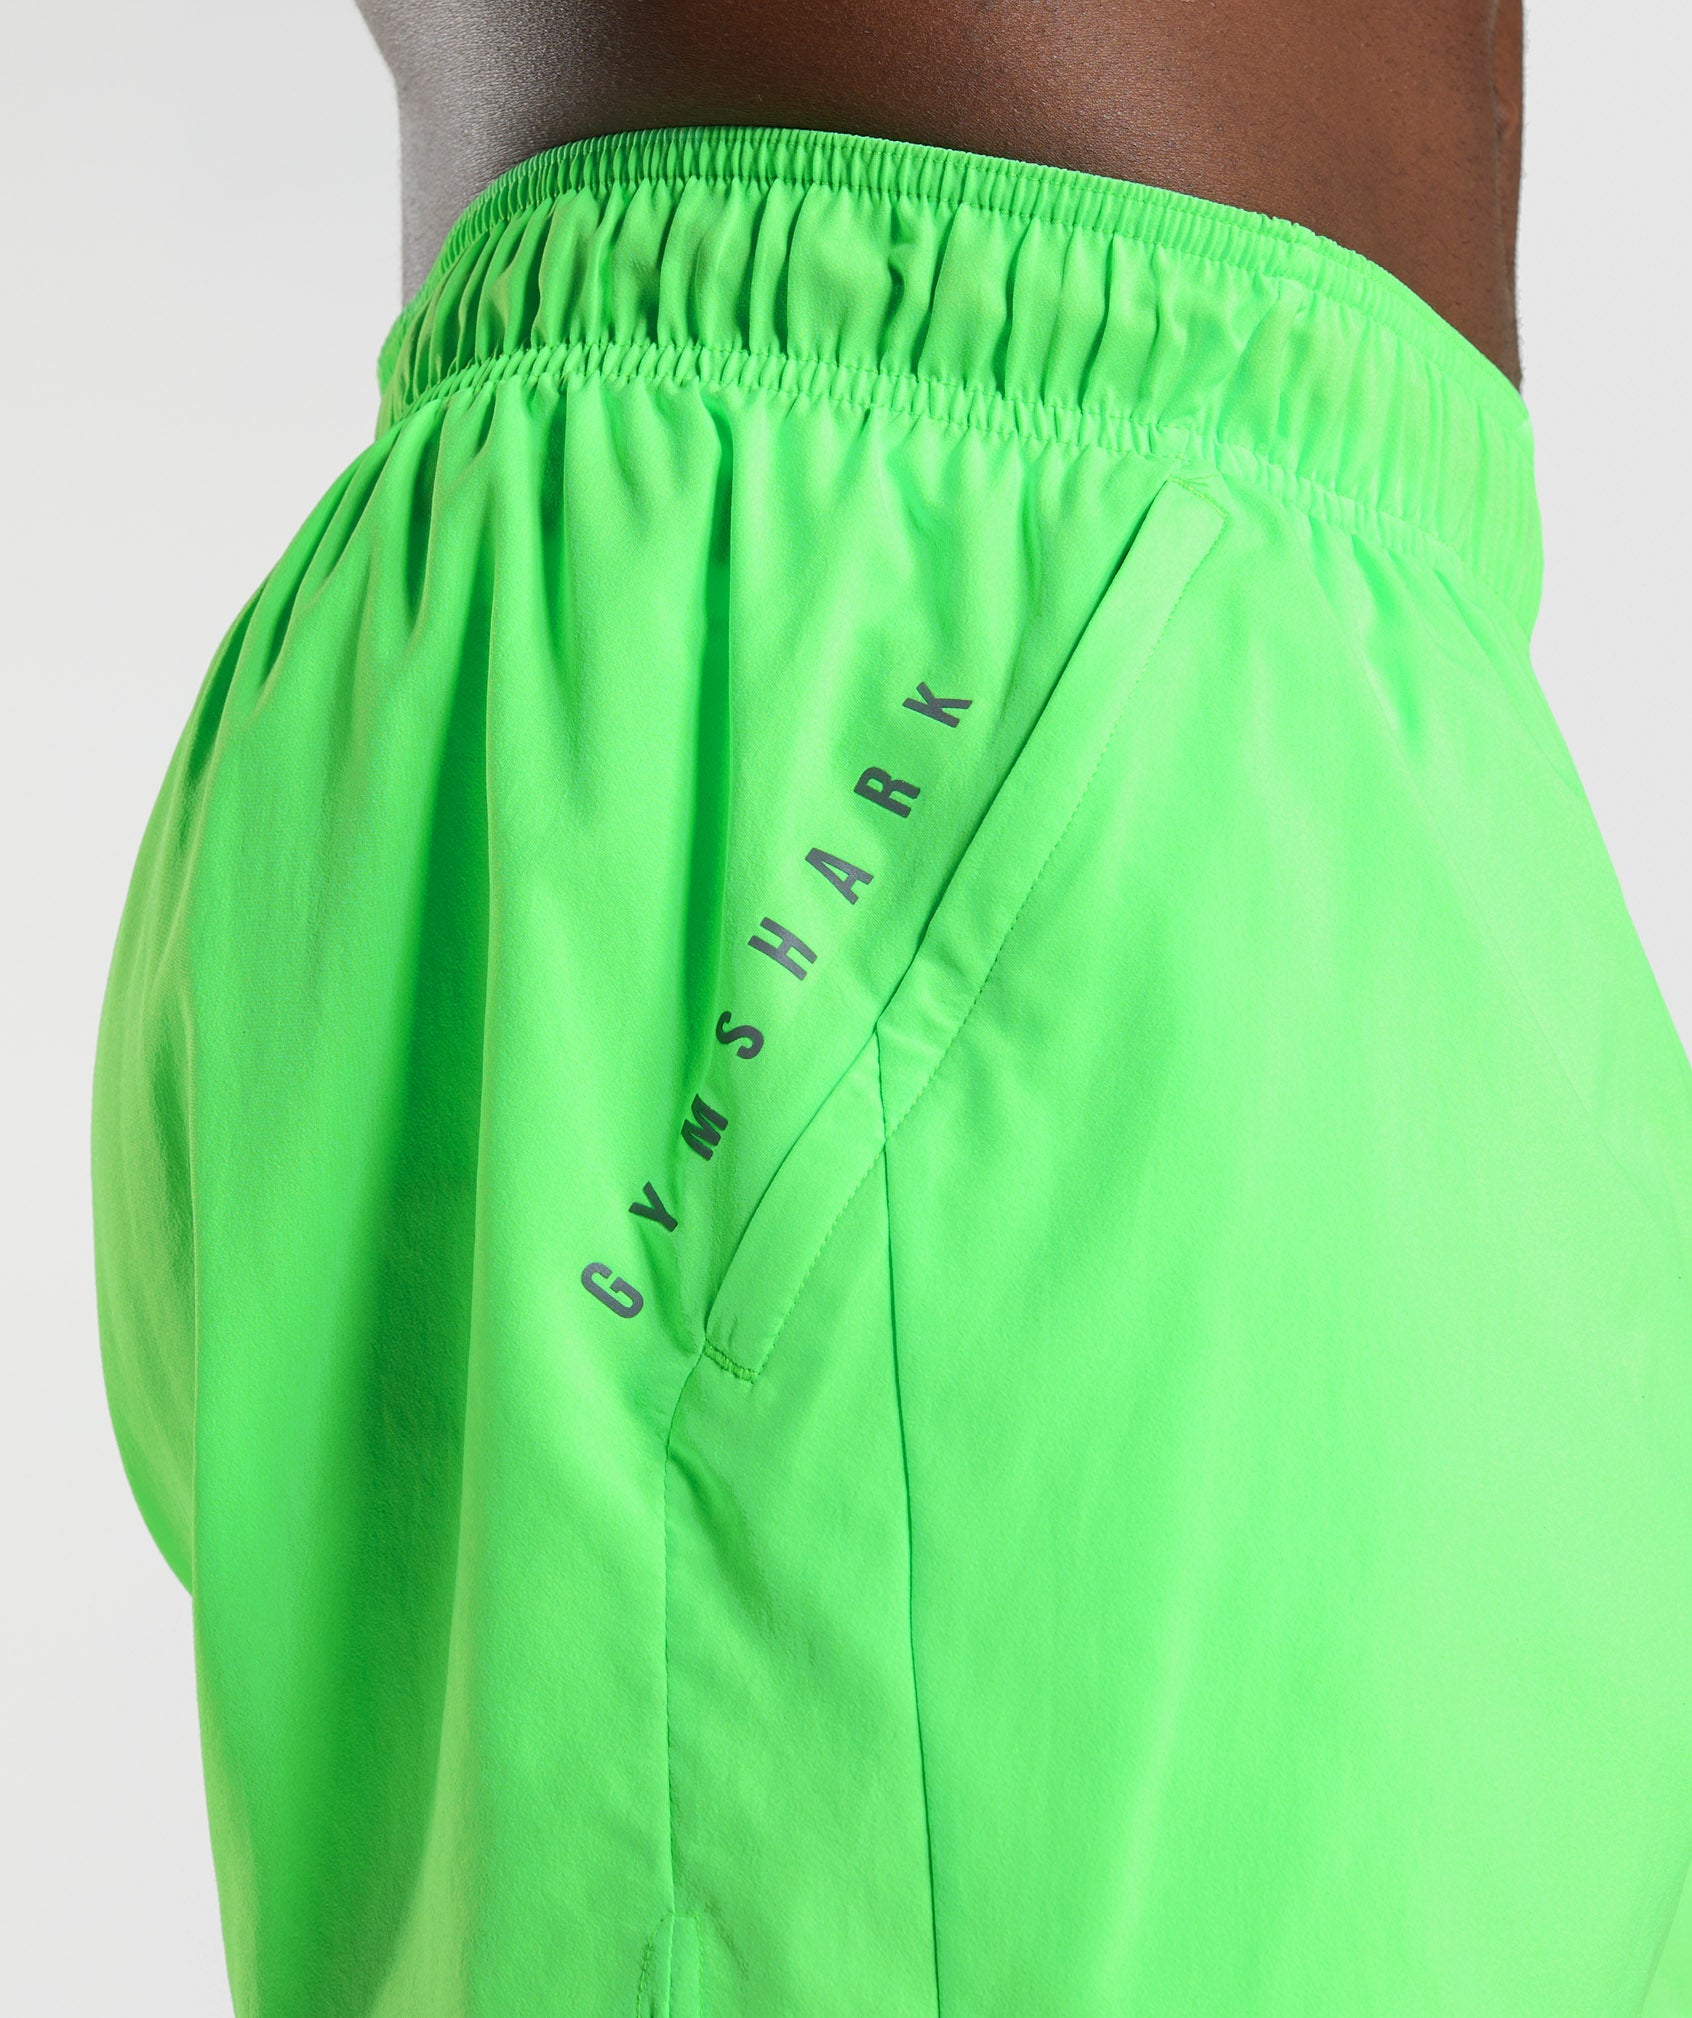 Sport 5" Shorts in Fluo Lime